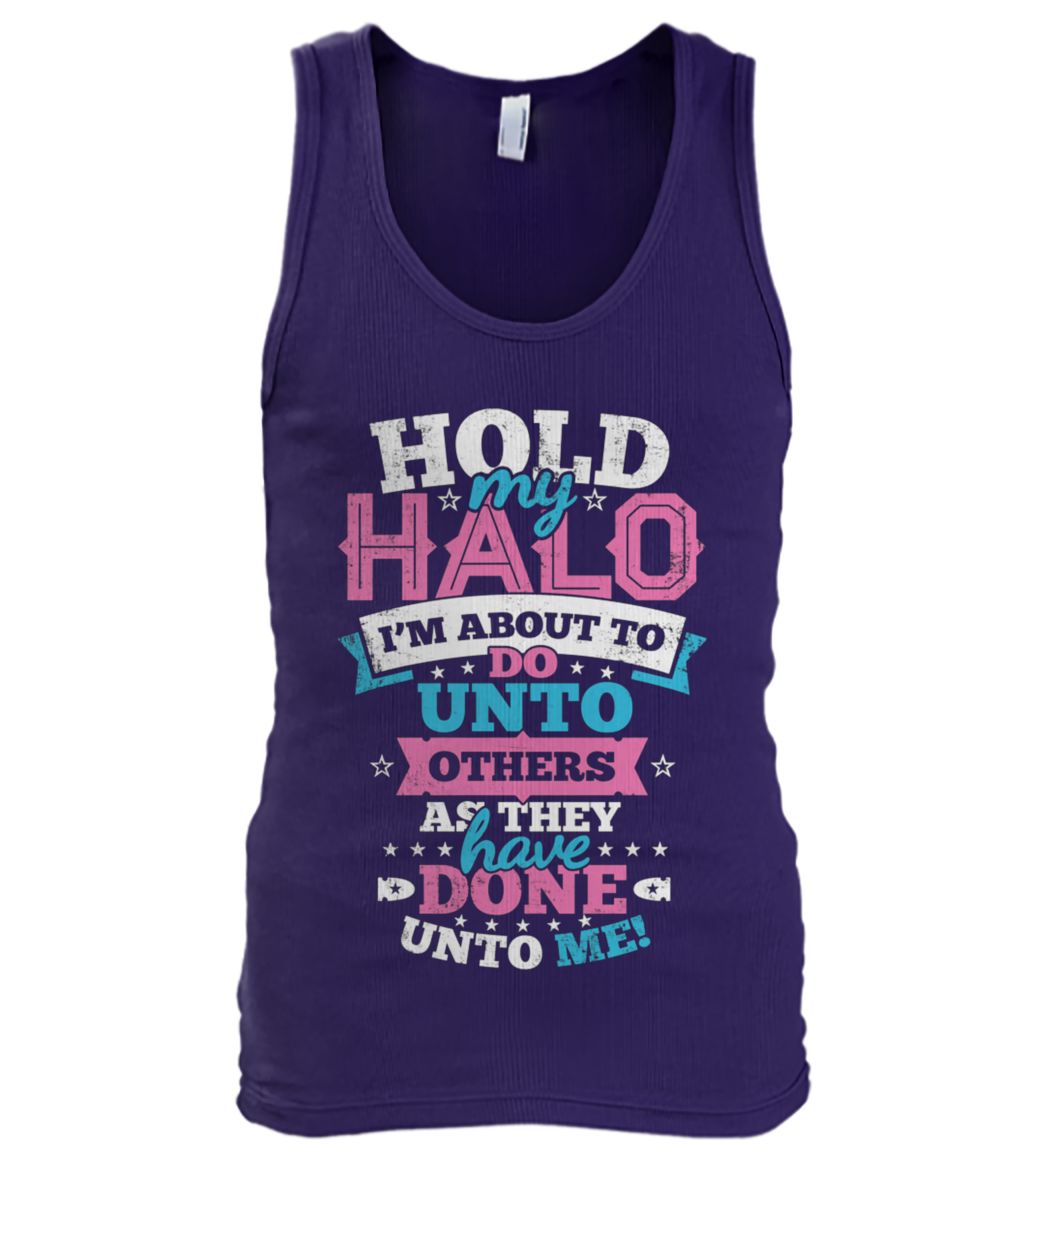 Hold my halo I'm about to do unto others as they have done unto me men's tank top